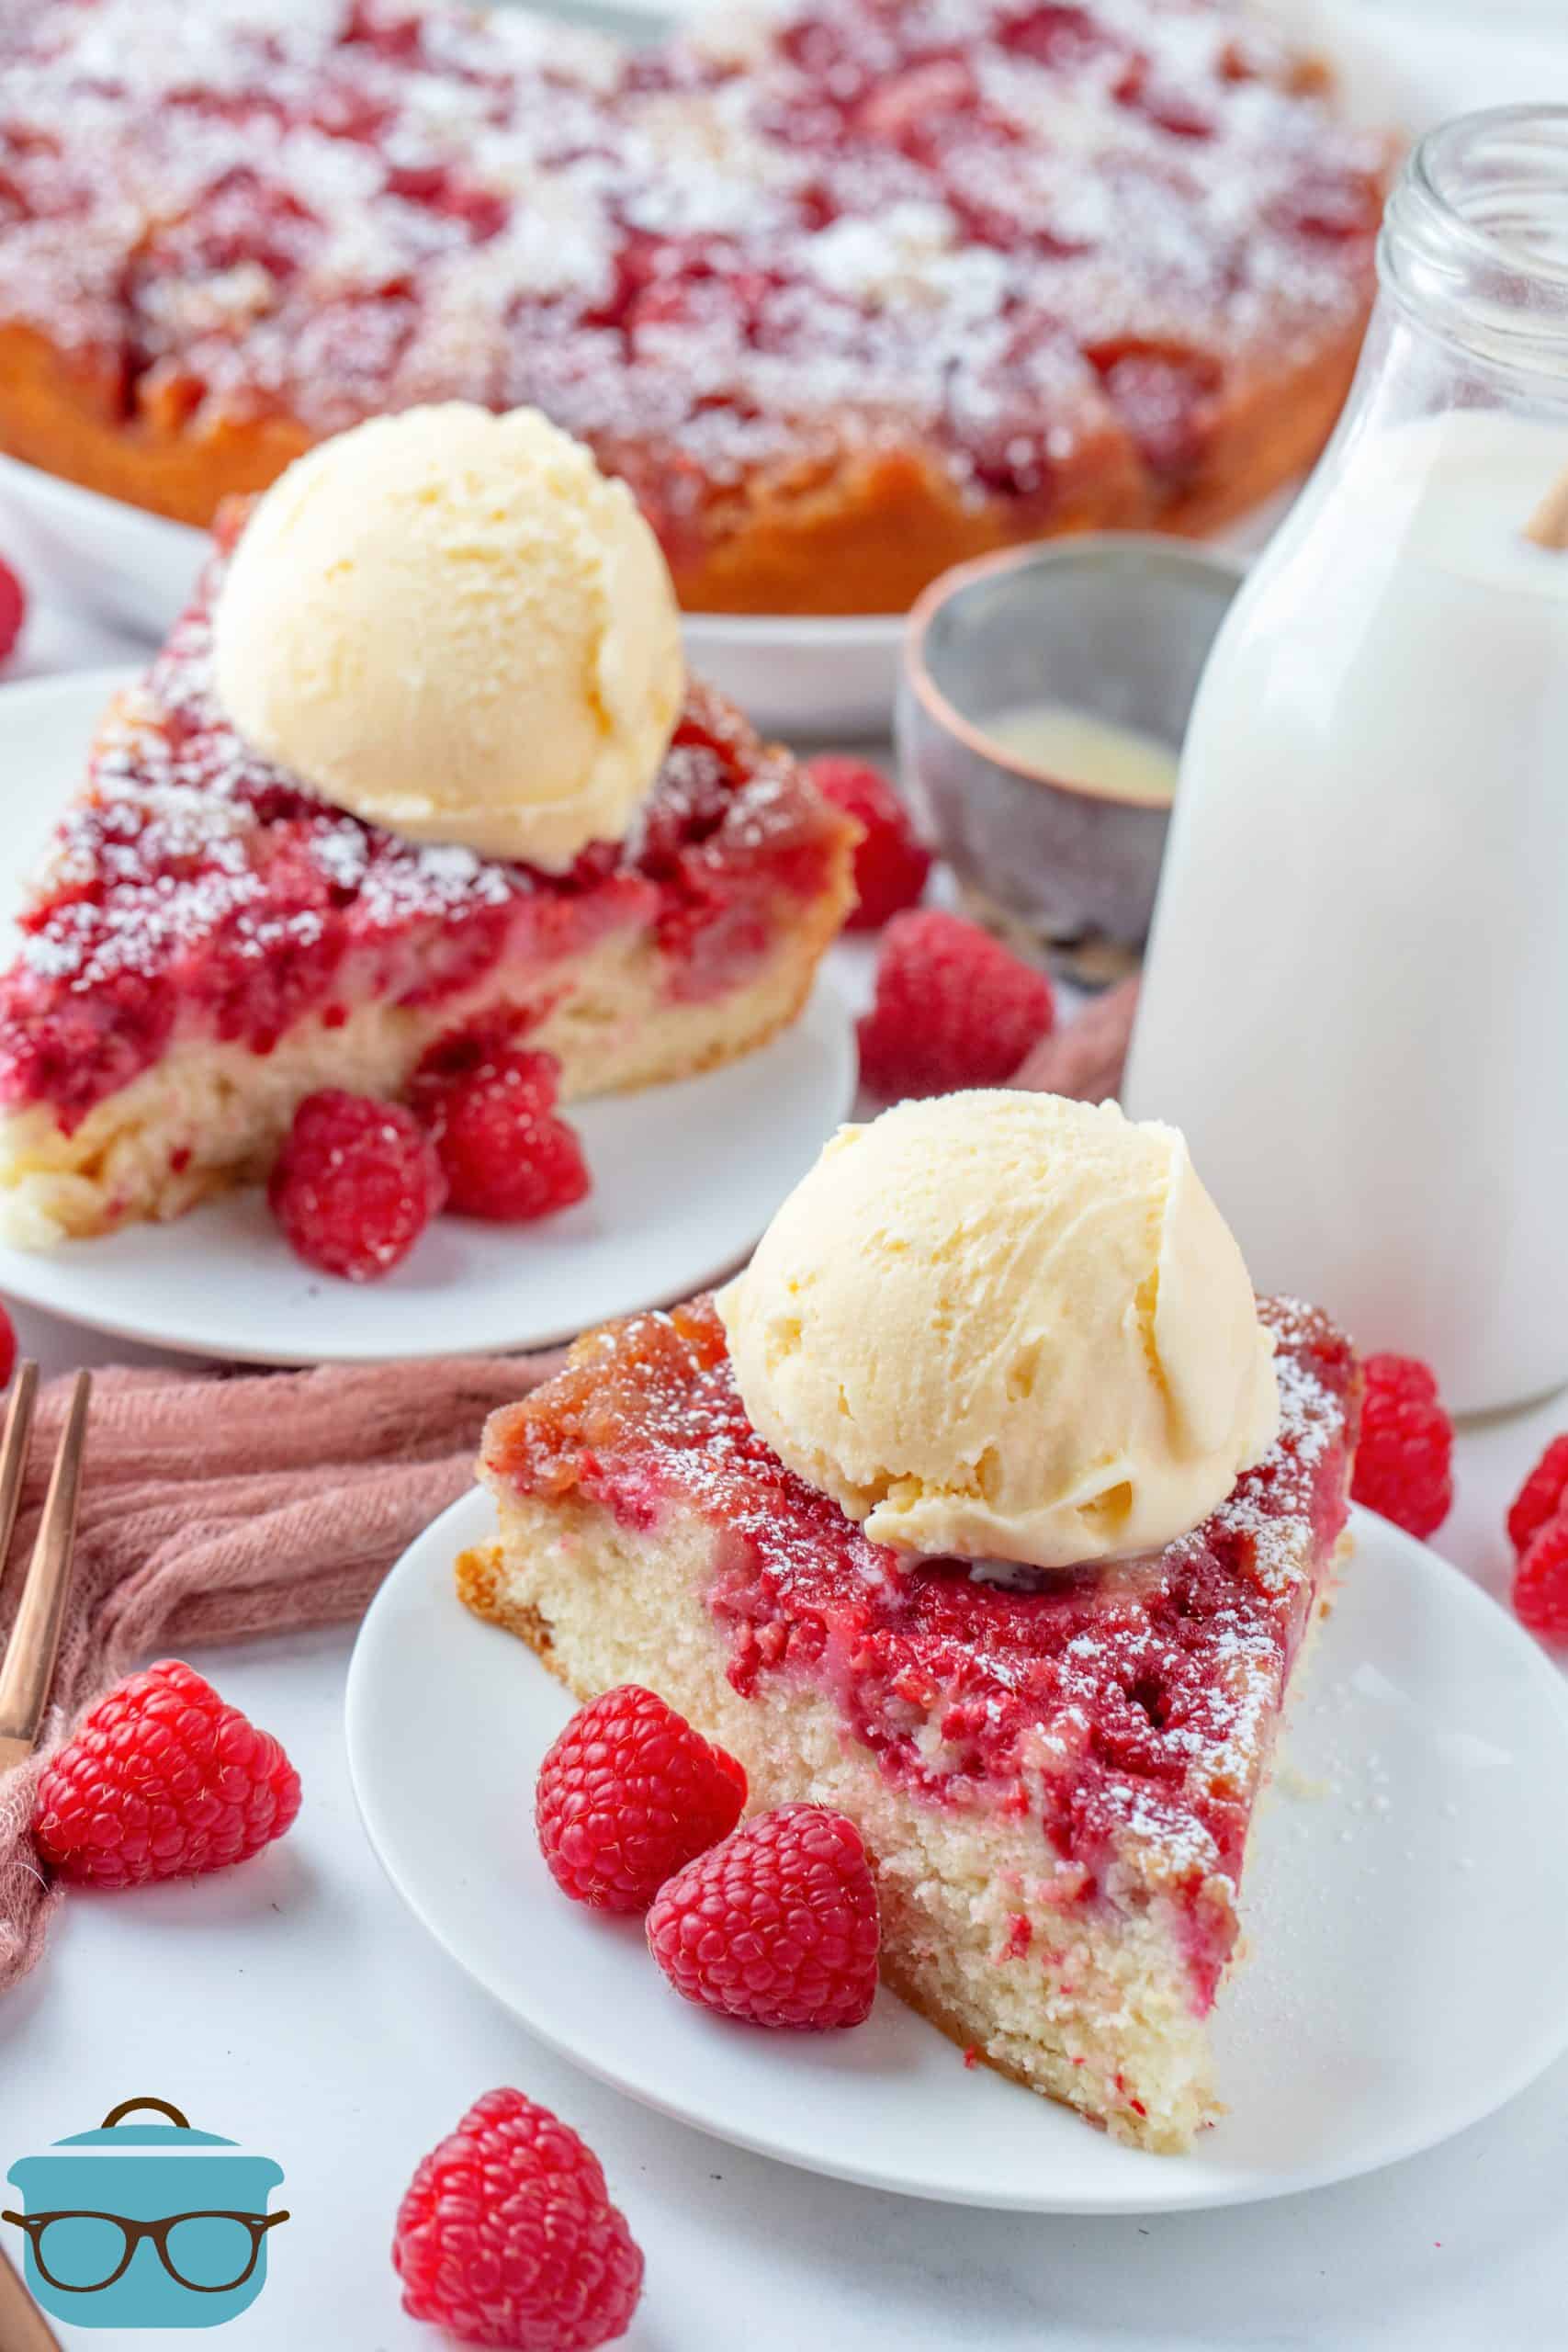 Two slices of Raspberry Upside Down Cake on white plates topped with ice cream.